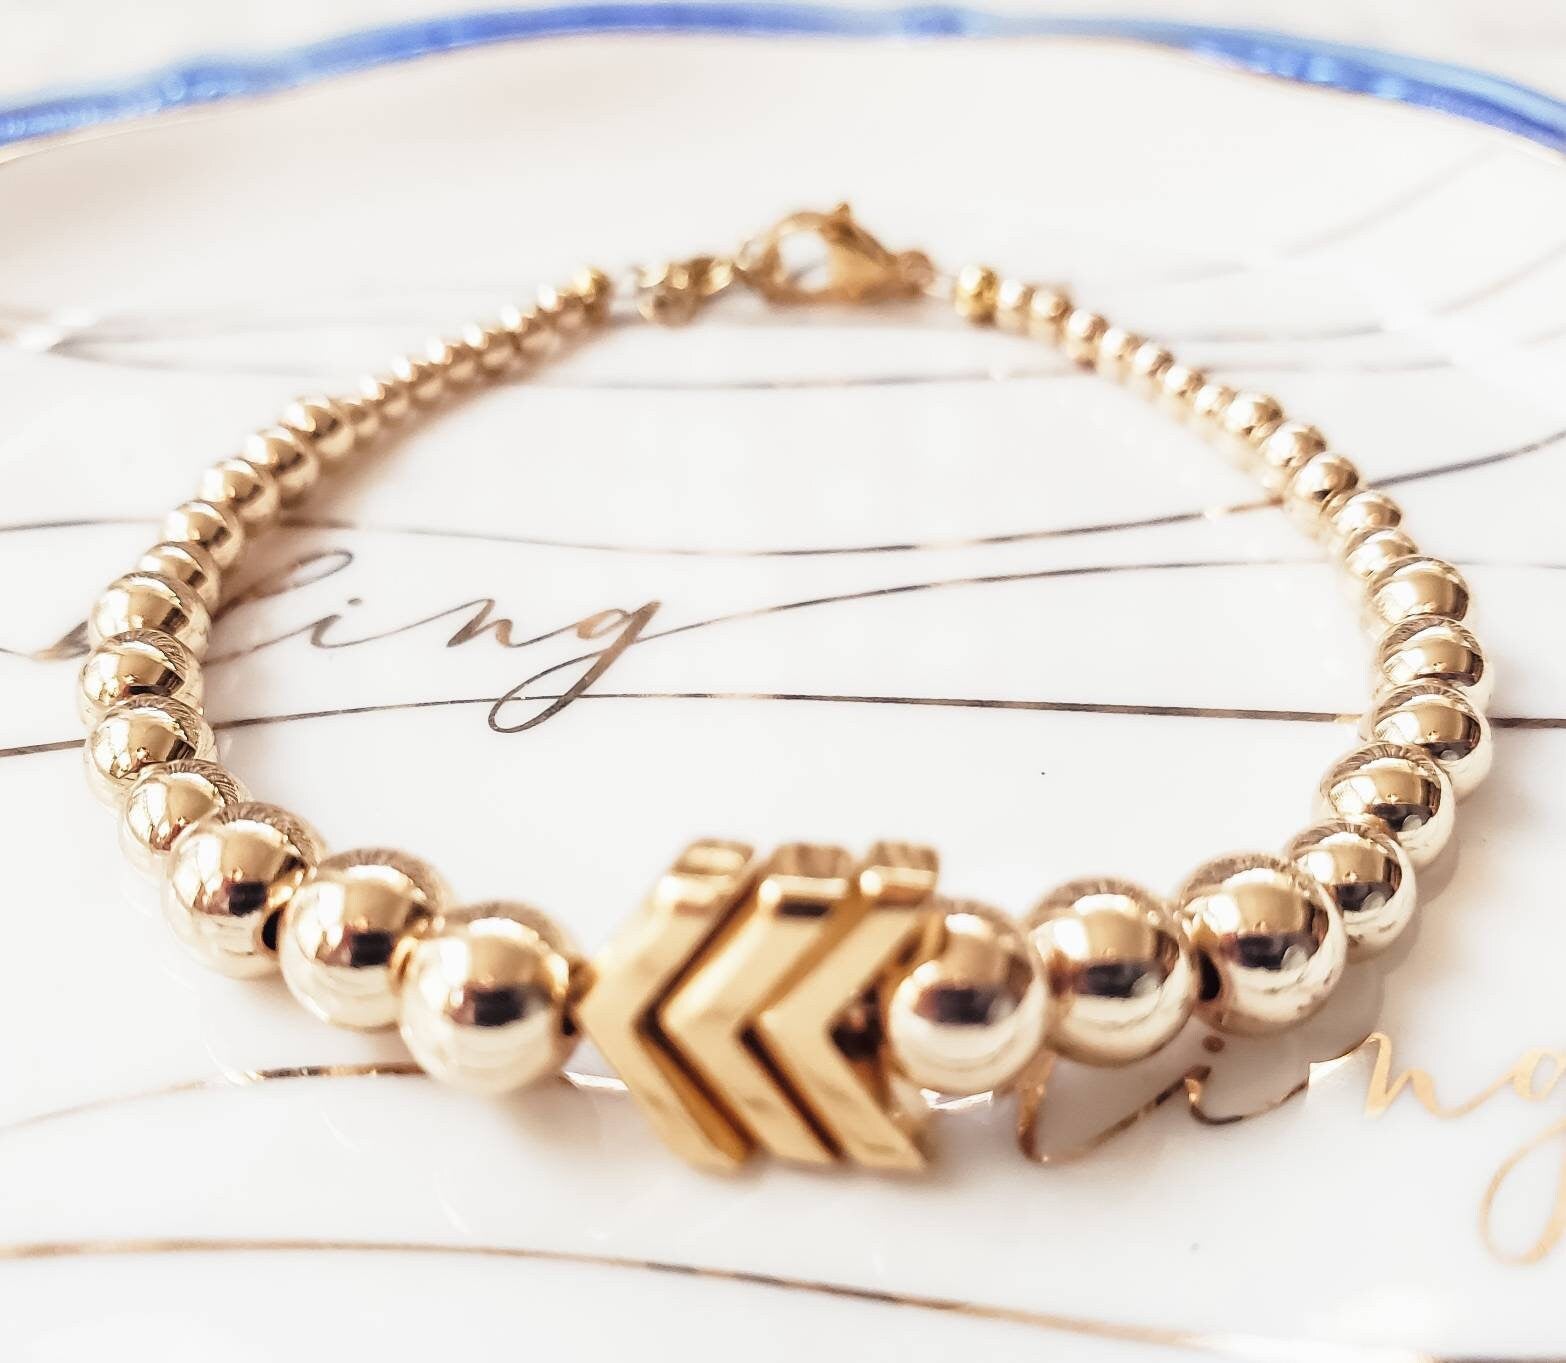 Minimal Design. Maximum Impact. 14K Gold Filled Beaded Bracelet with 3 Gold Plated Chevrons. M (6.5 - 7.5) Inches